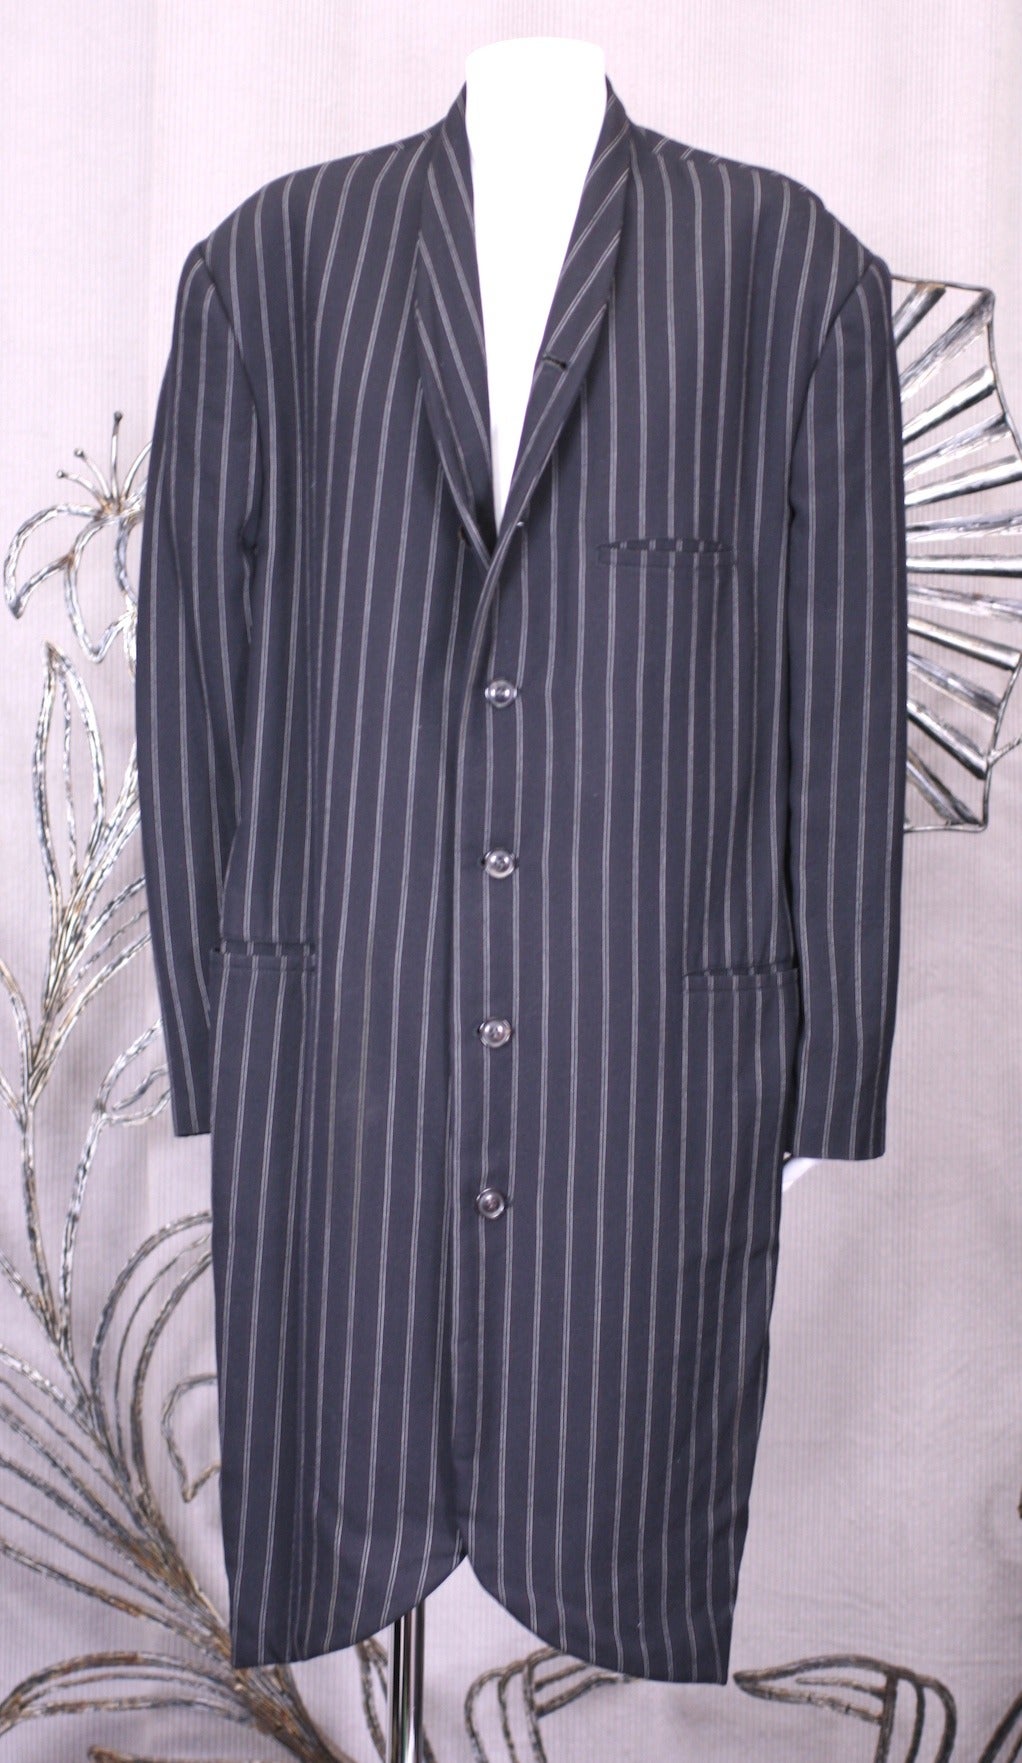 Yohji Yamamoto wool pinstriped mourning style coat with faux horn buttons and extended shoulder. 1980s Japan. Size M. Suitable for men or women. Unlined.
39